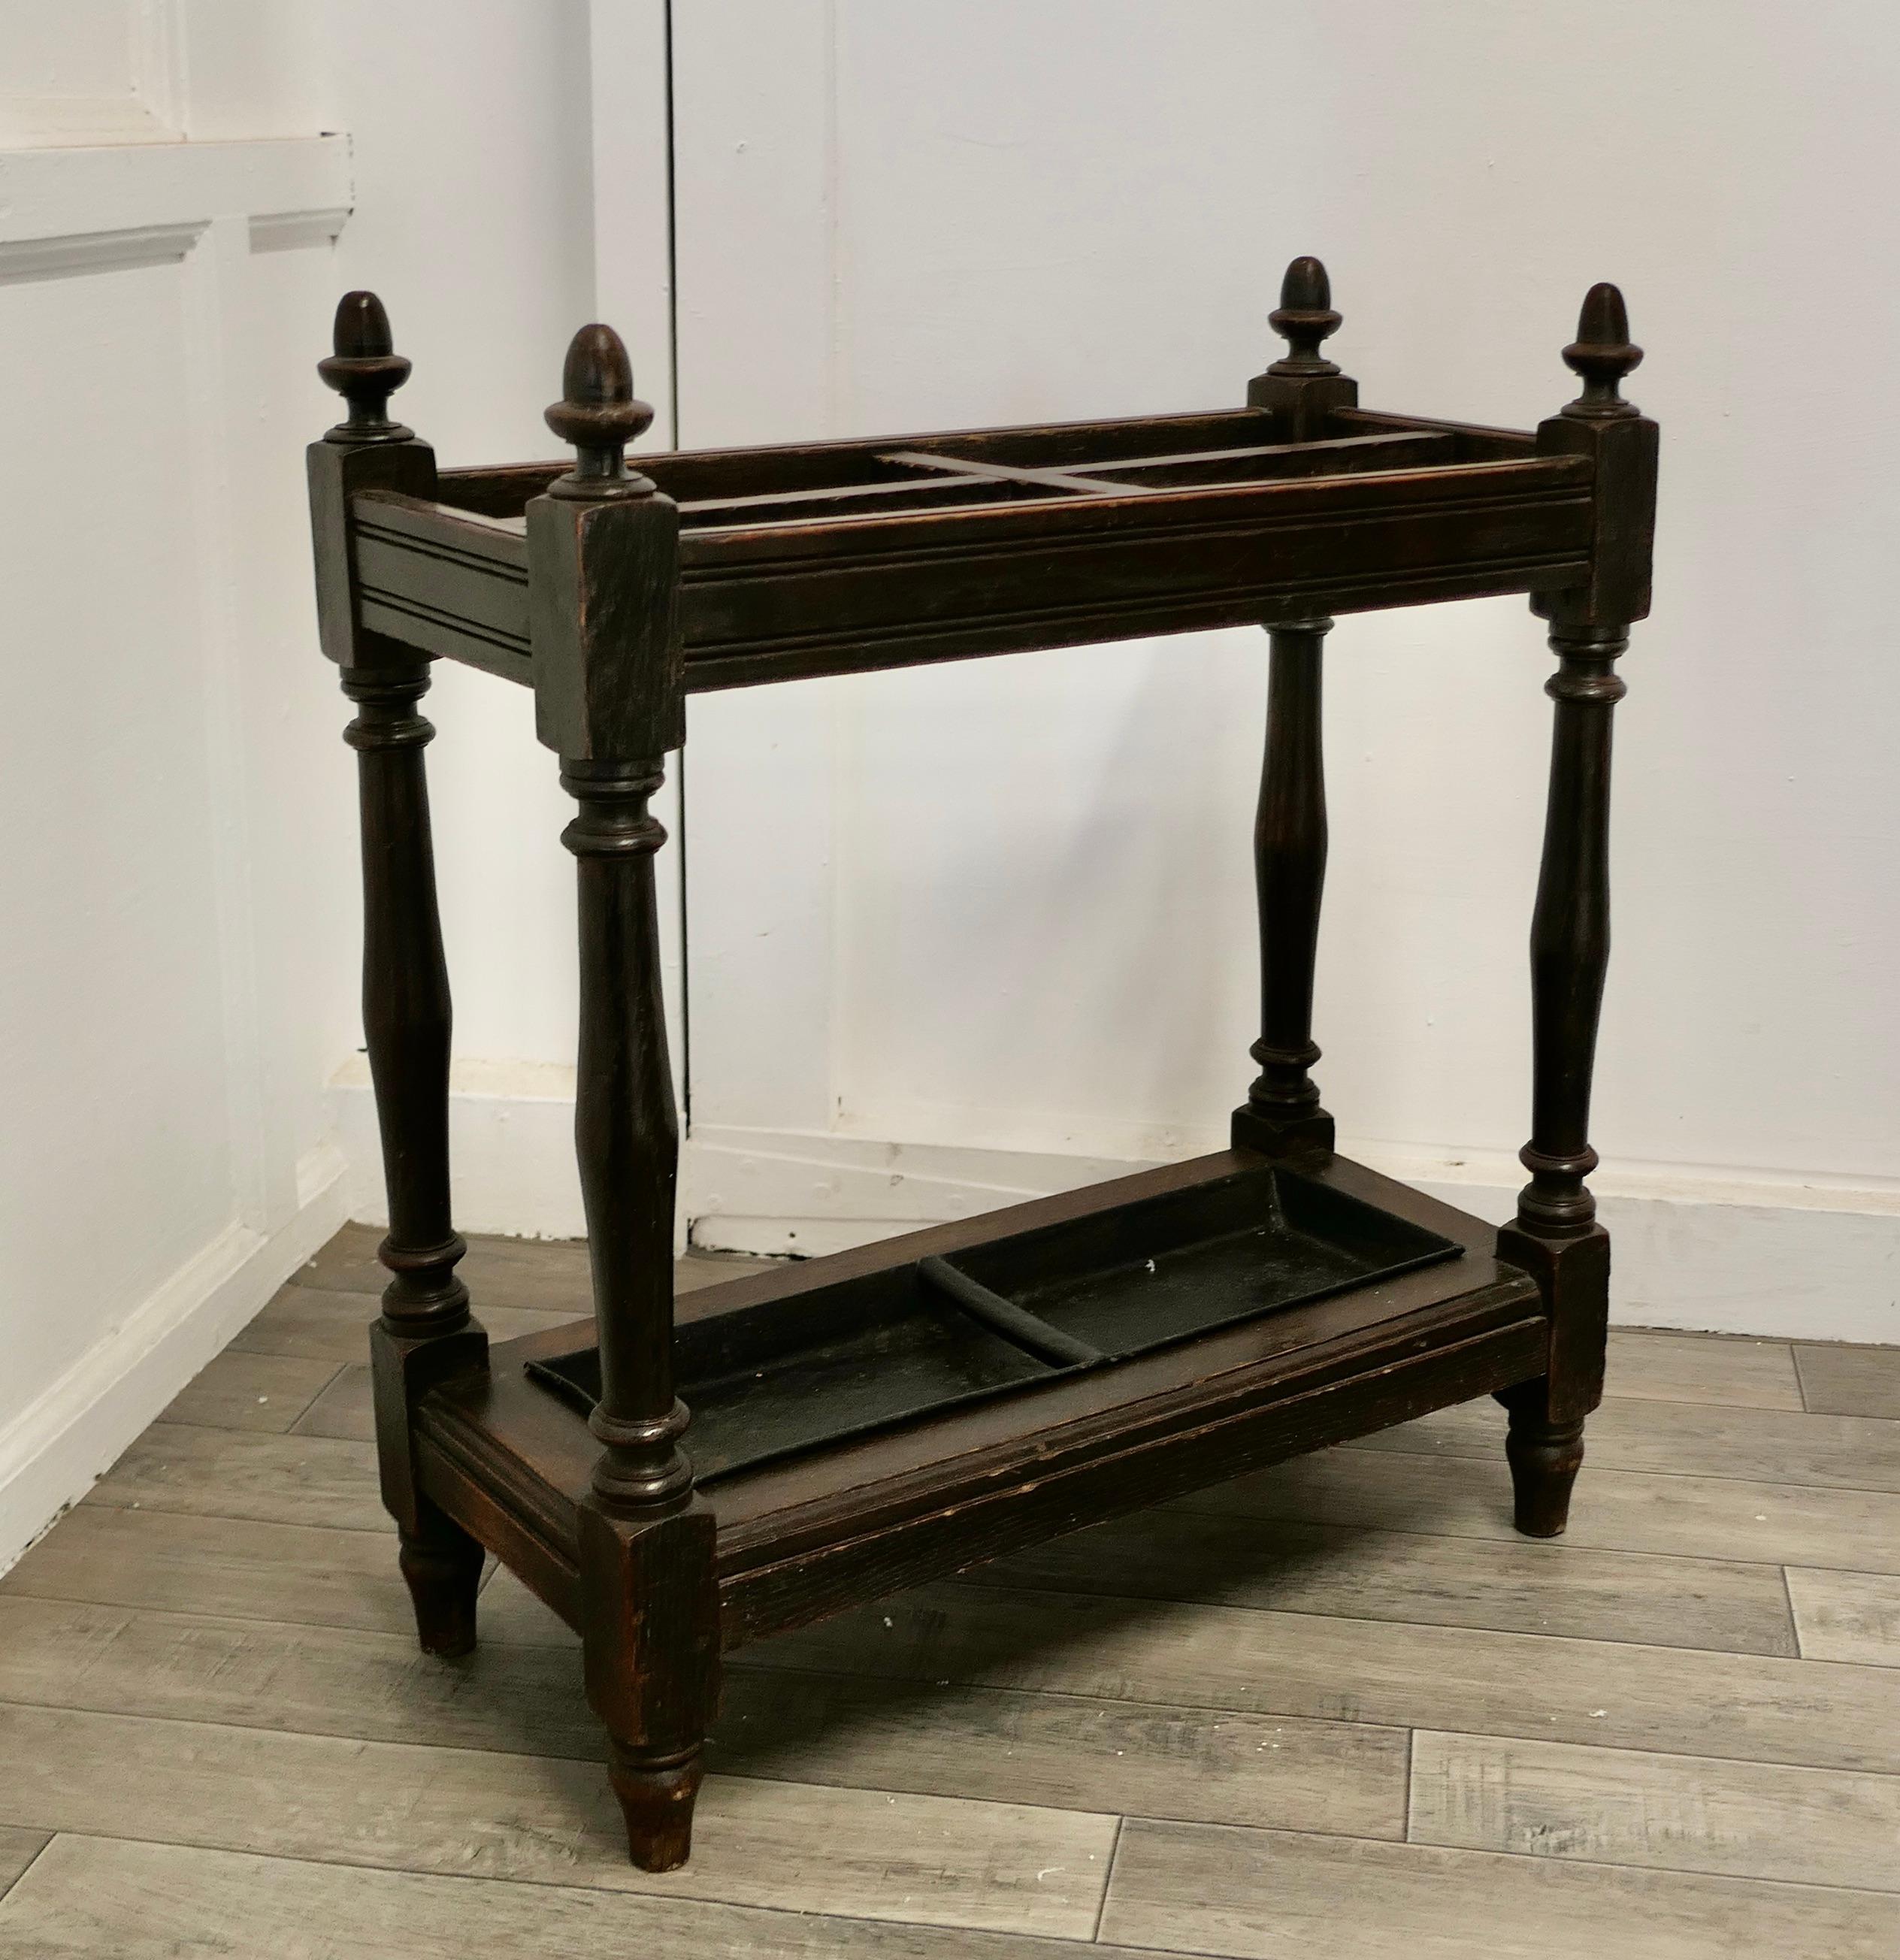 Oak Stick or Umbrella hall stand

The stand is made in Oak, it has turned uprights, the top is divided into 4 sections and will hold both Walking Sticks or Umbrellas, it also has a full length drip tray
The stand is 27” high, 24” wide and 11”